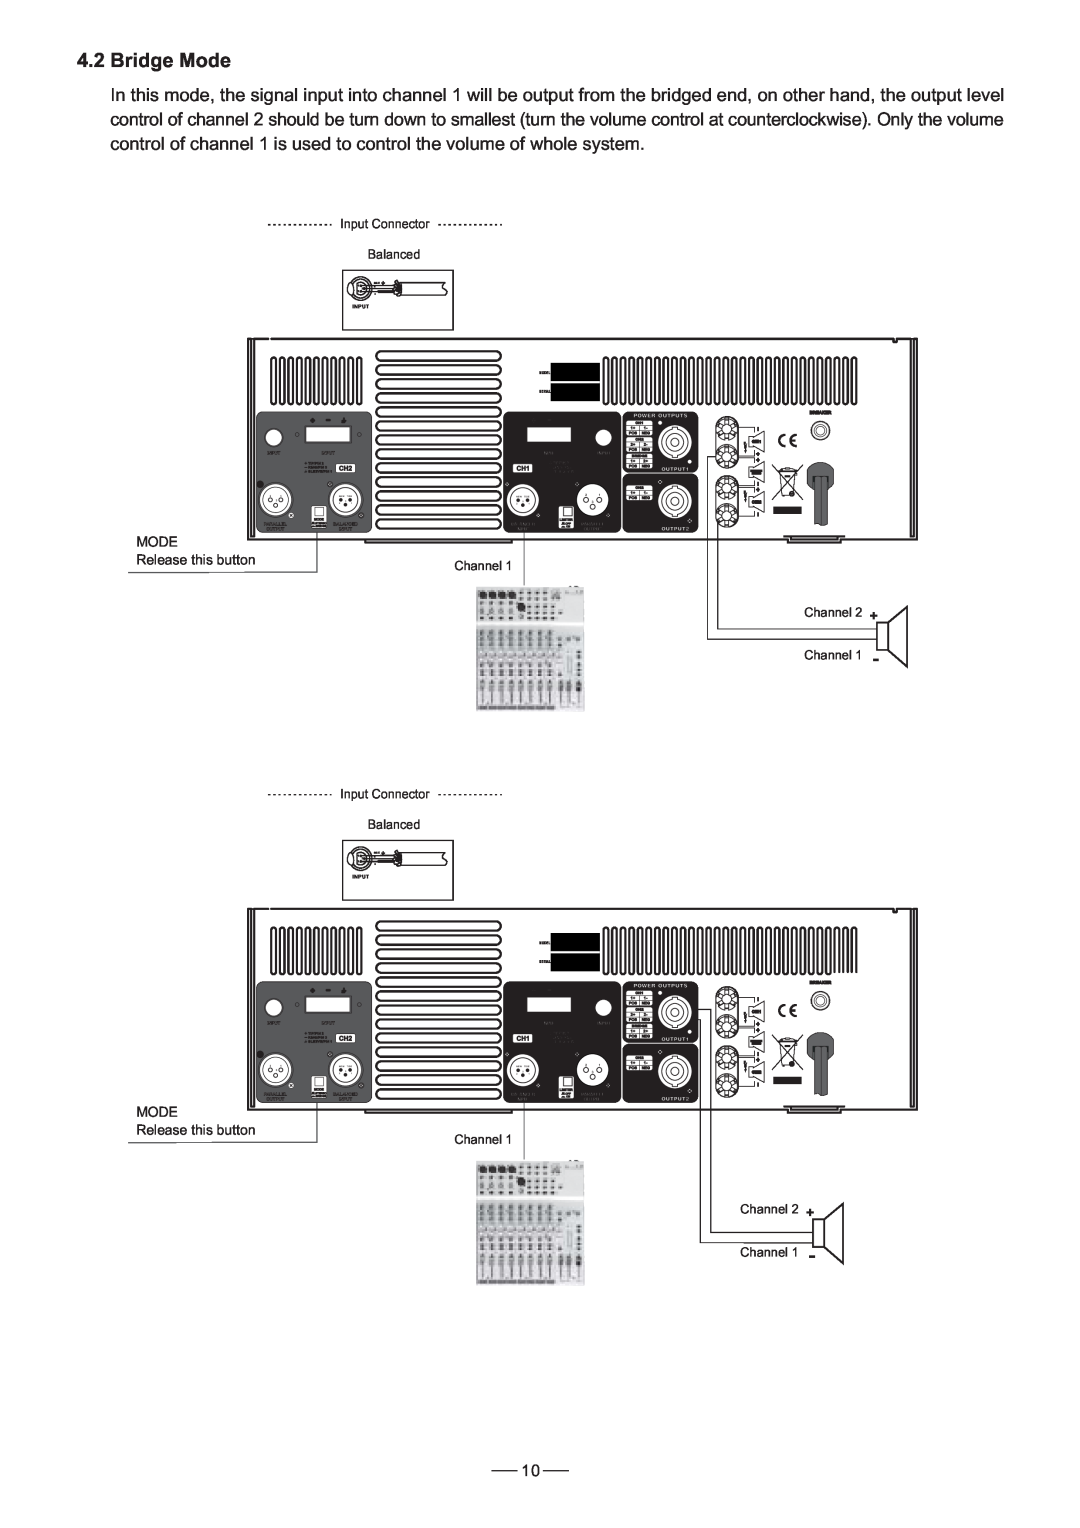 Mistral 6000 user manual 4.2Bridge Mode, MODE Release this button, Input Connector Balanced, Channel Channel 